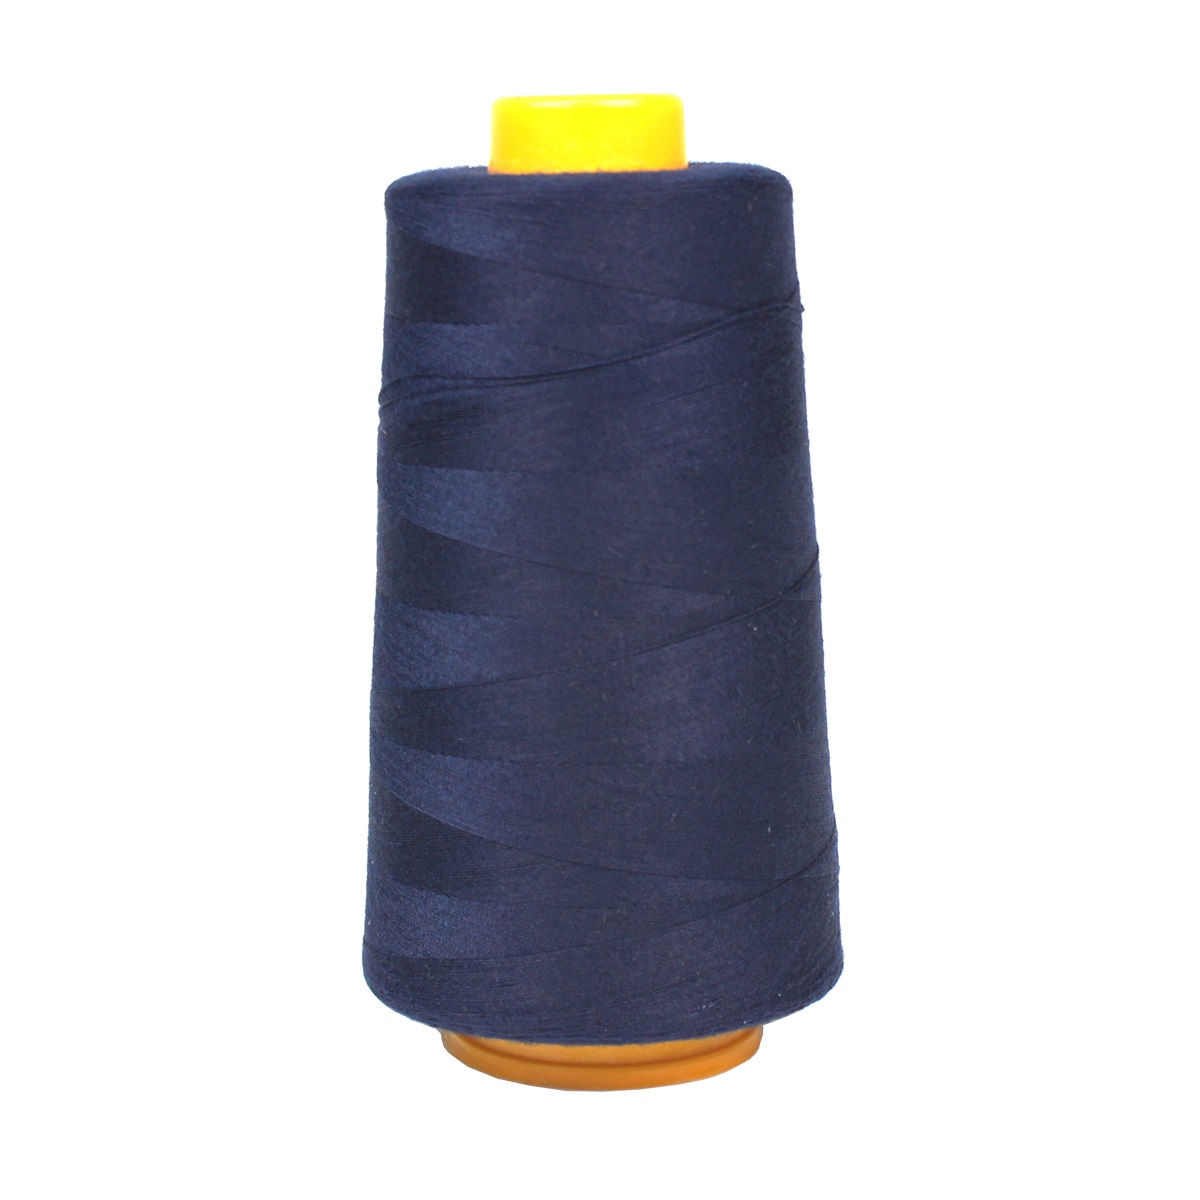 REStyle Cone 3000yard Donker Blauw-210